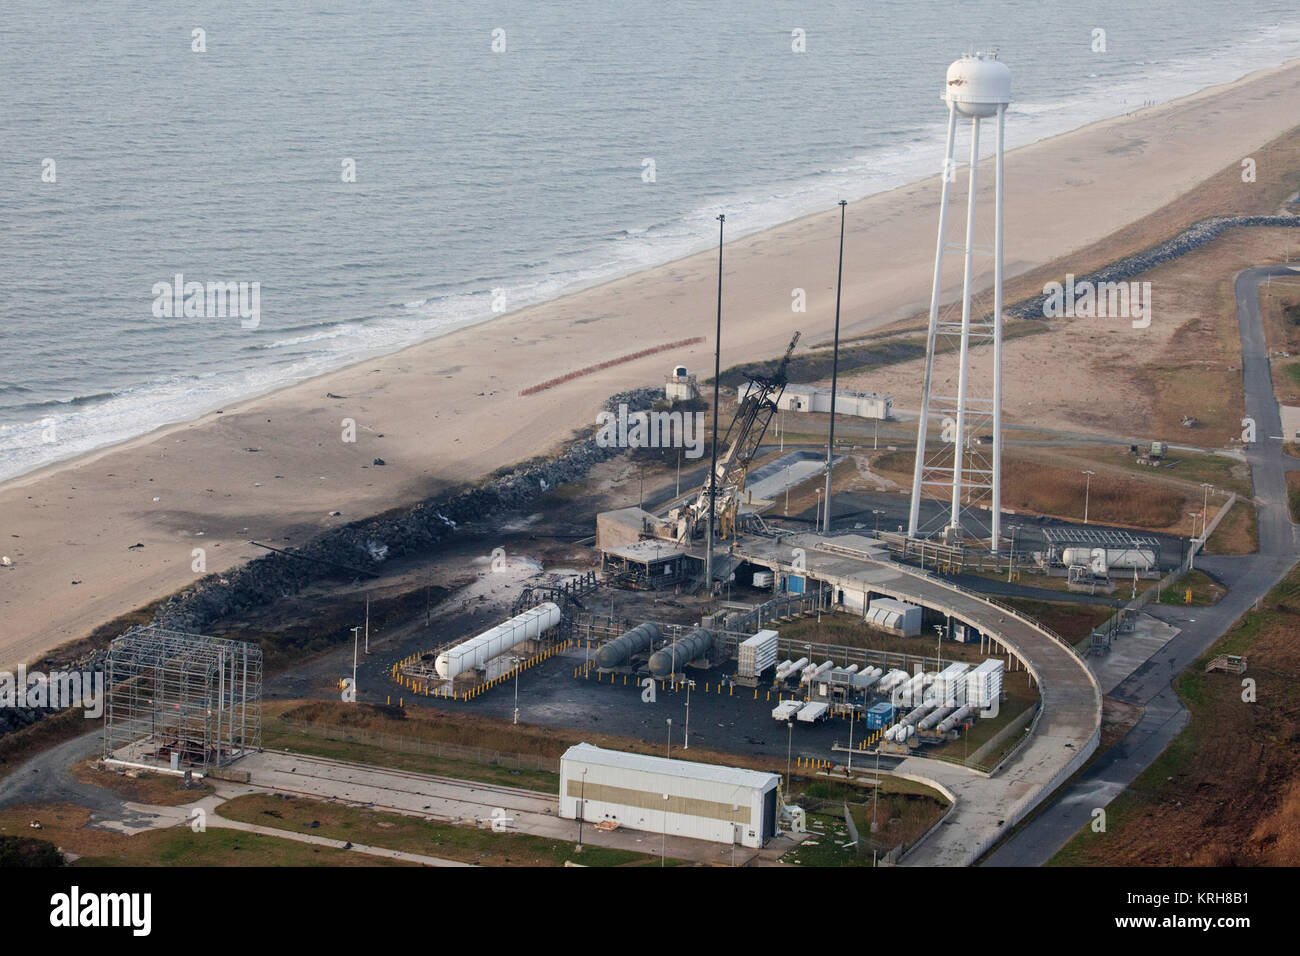 x-default Aftermath of Antares Orb-3 explosion at Pad 0A (20141029a) Stock Photo